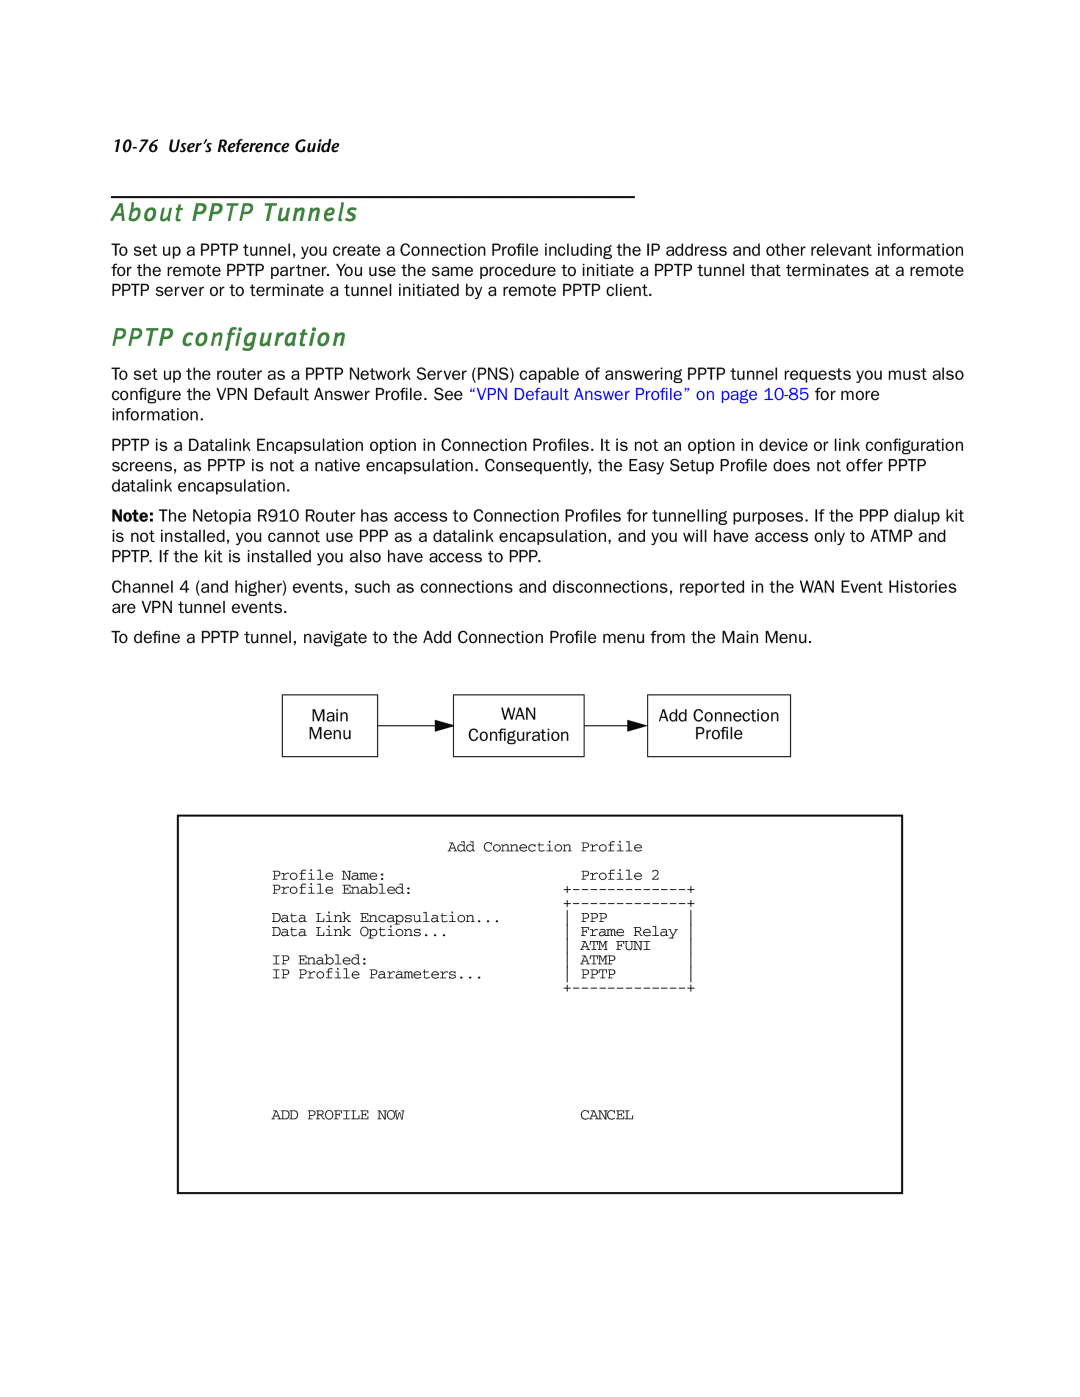 Netopia R910 manual About PPTP Tunnels, PPTP configuration, User’s Reference Guide 